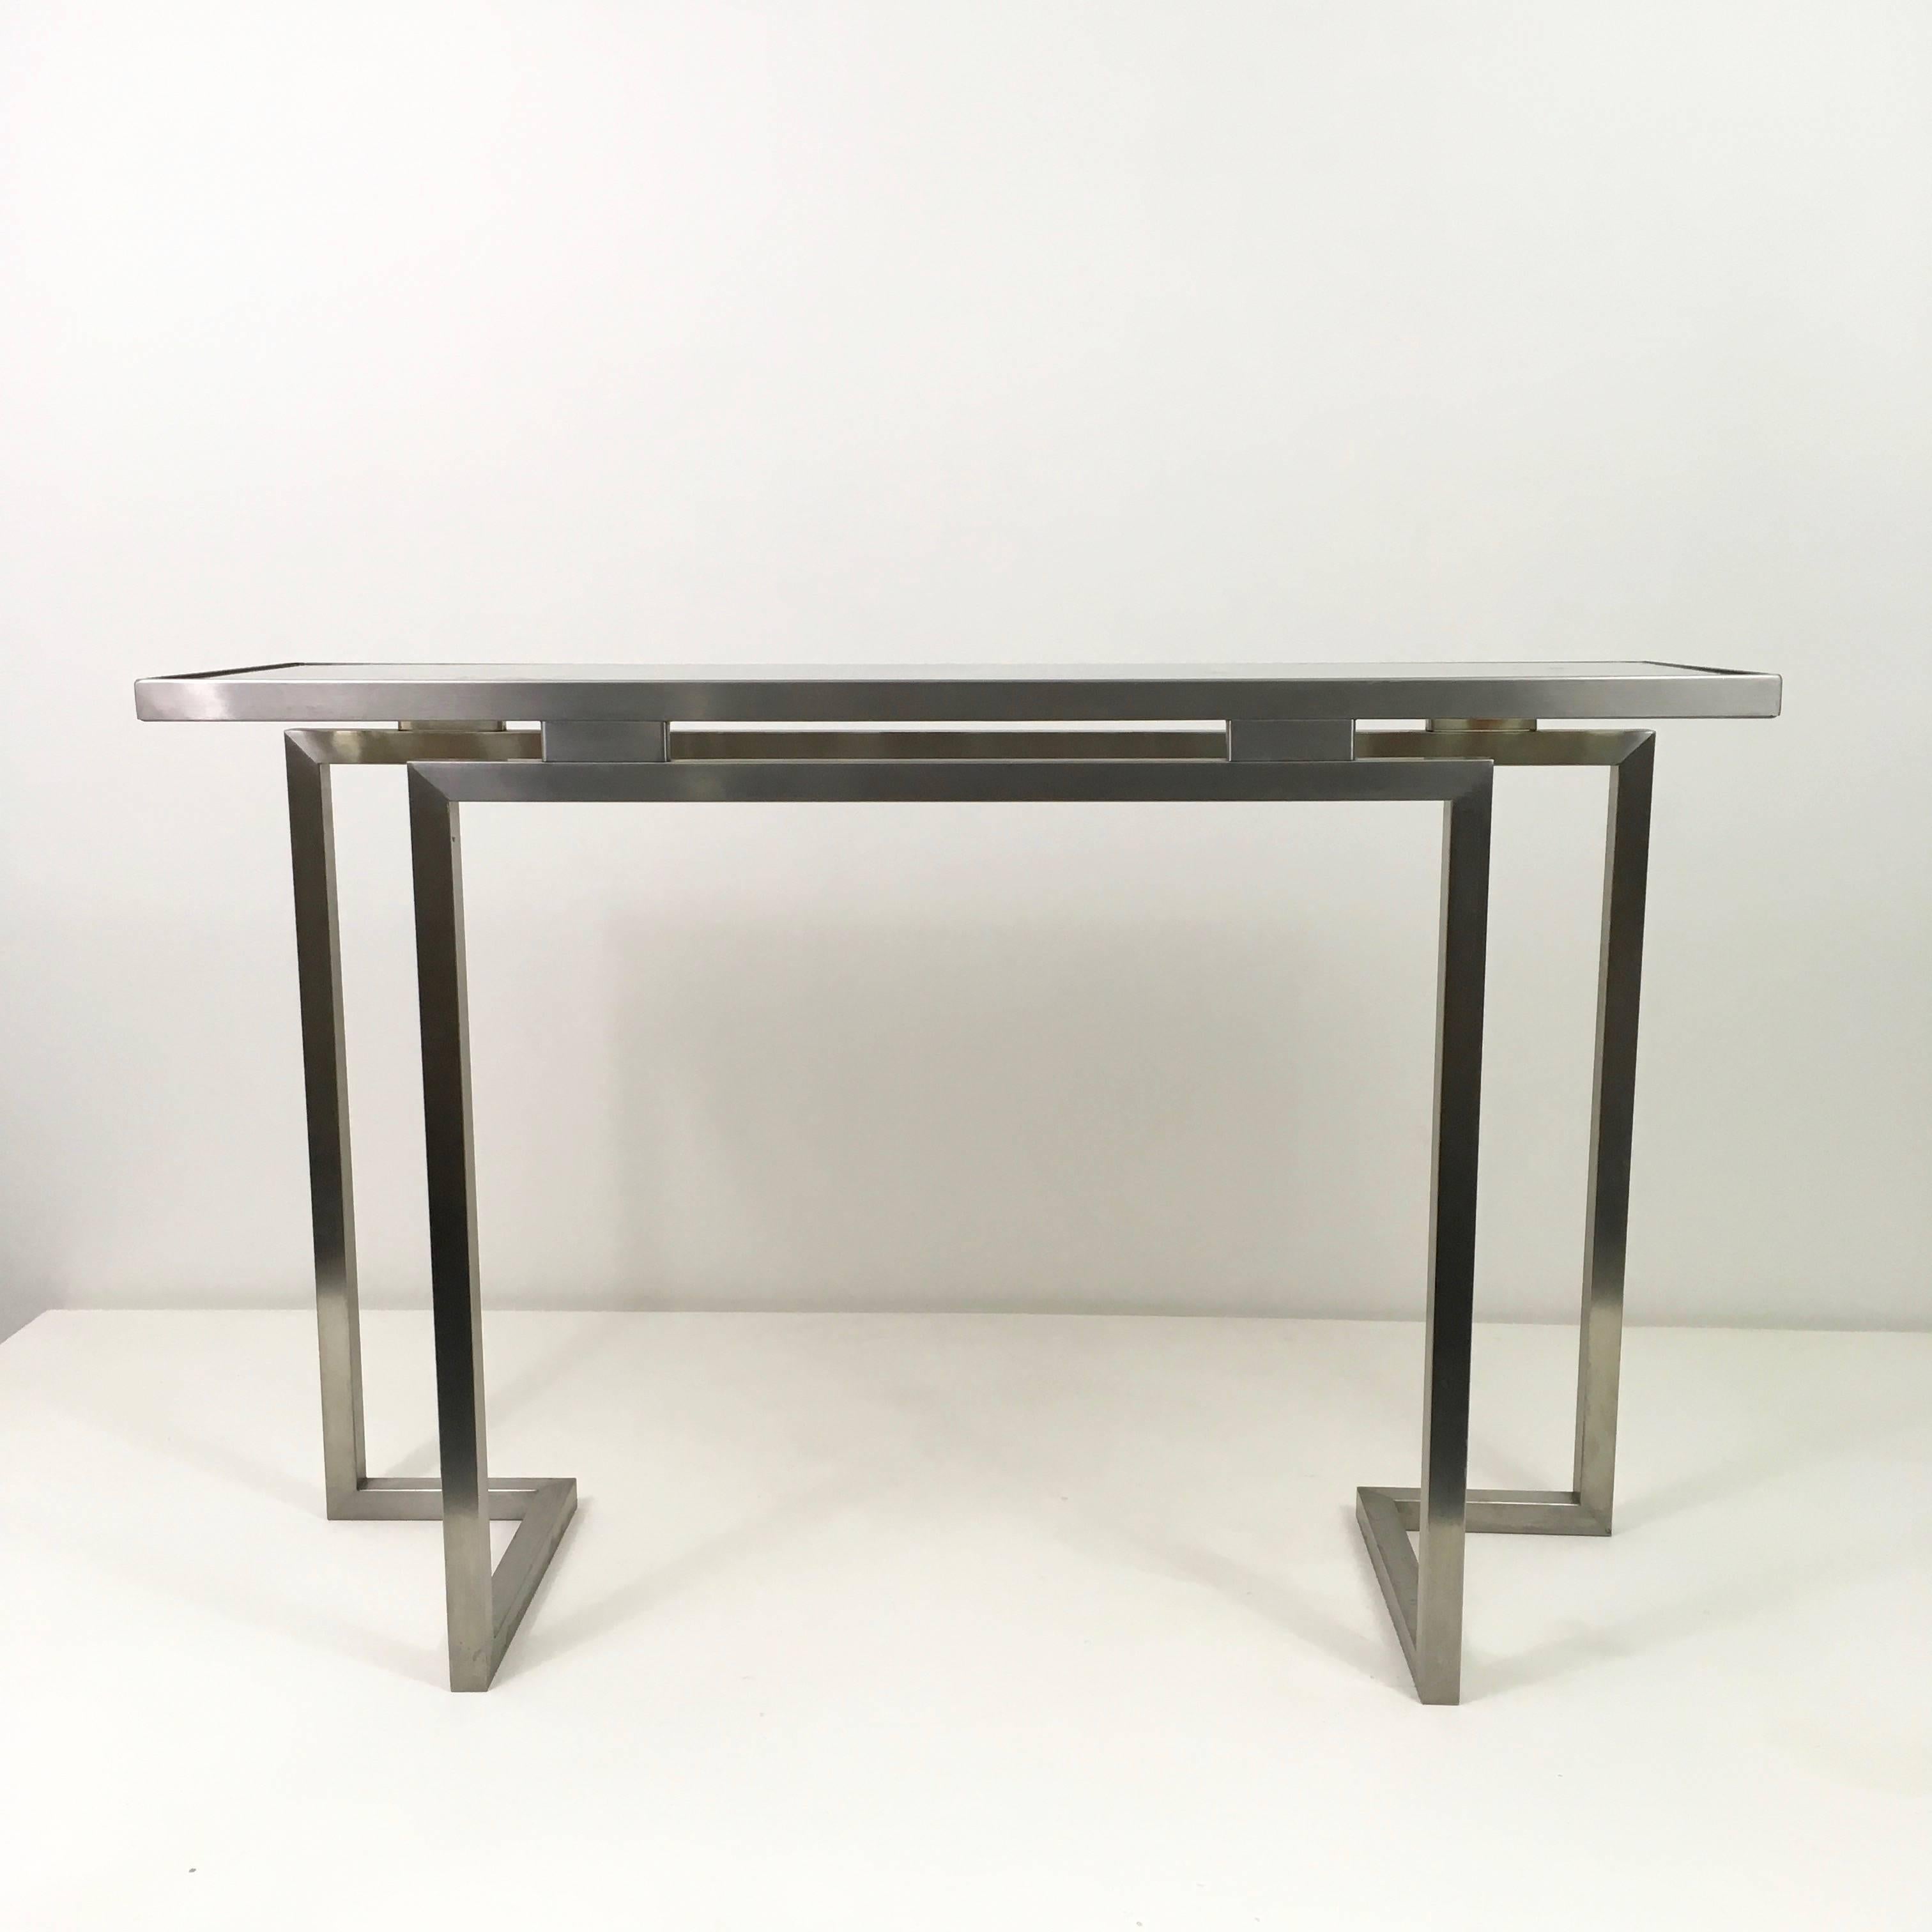 Marie Claude de Fouquieres Resin and Stainless Steel Console For Sale 1